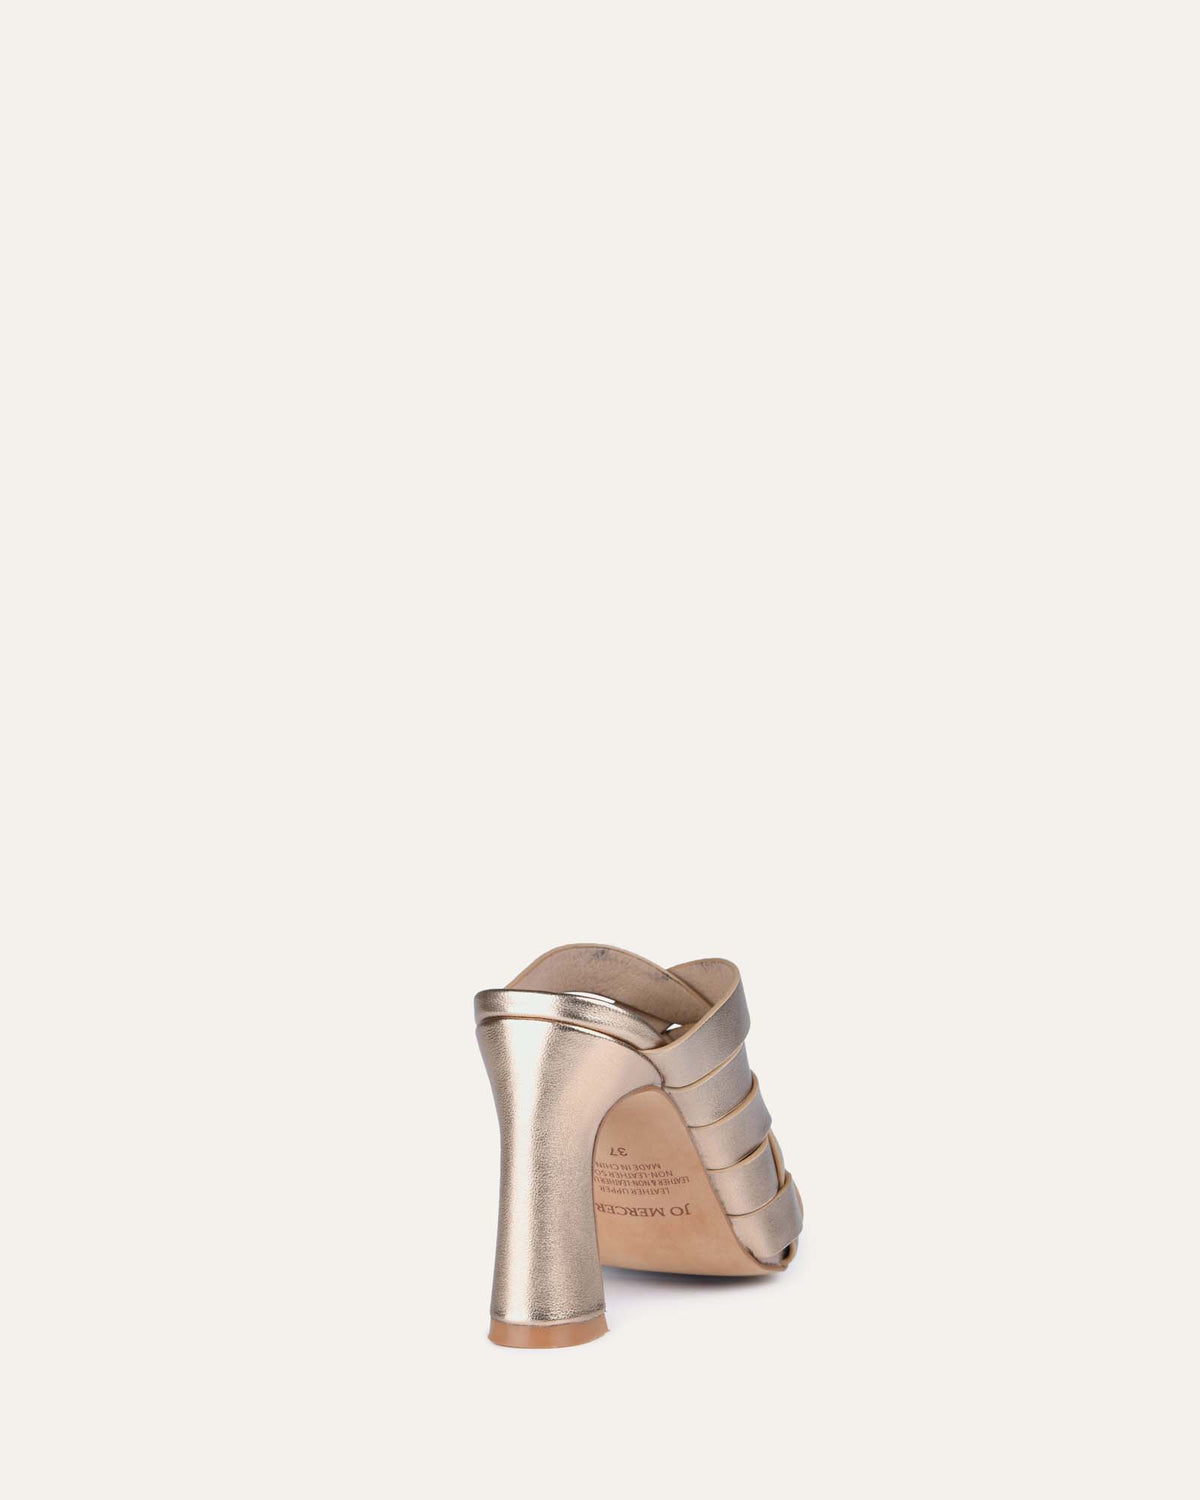 DYLAN HIGH HEELS GOLD LEATHER